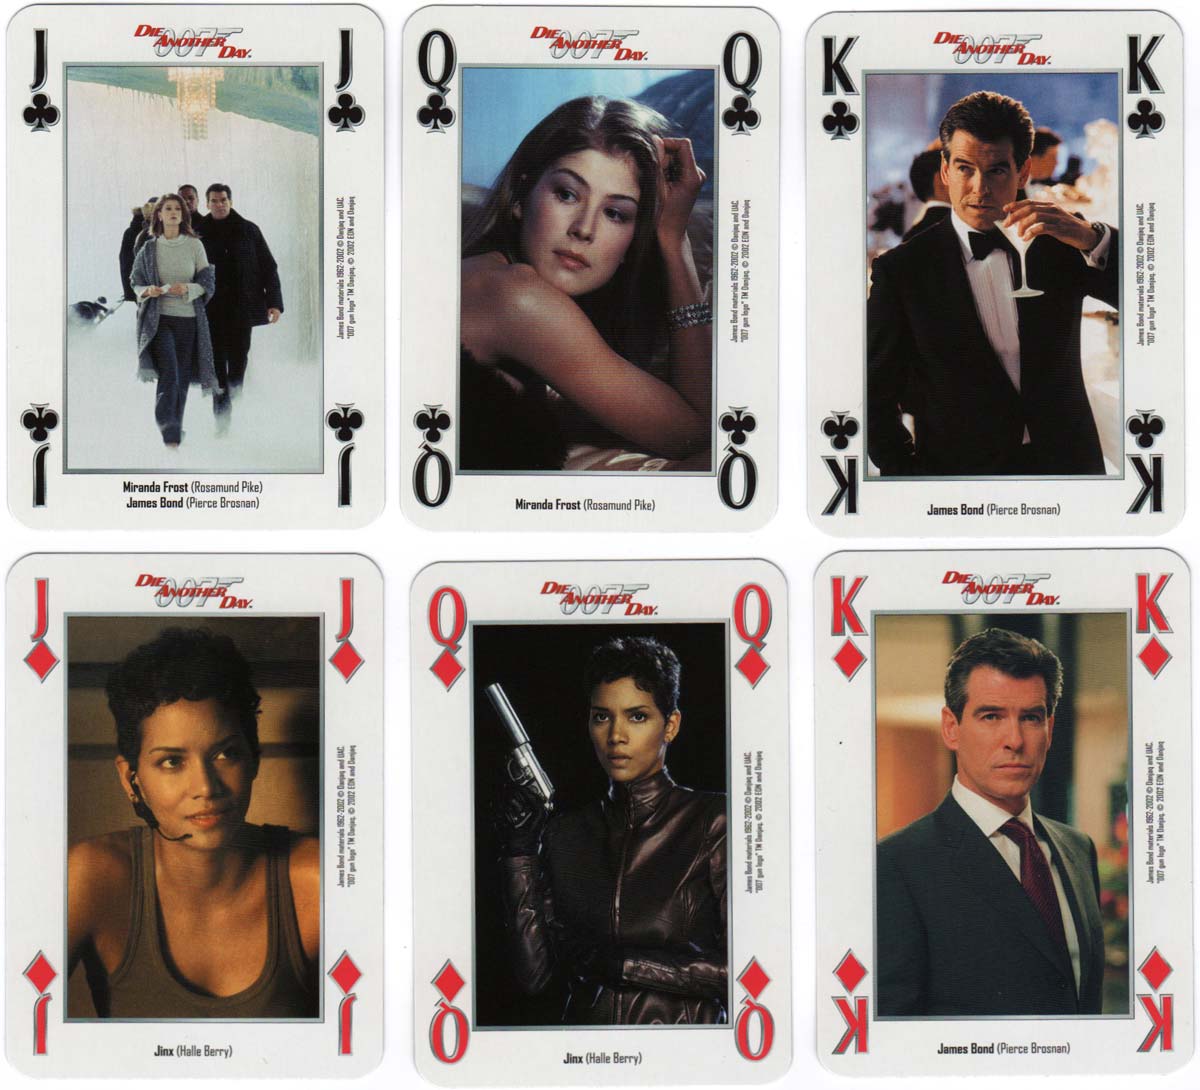 “007 Die Another Day” themed playing cards printed by Carta Mundi, 2002